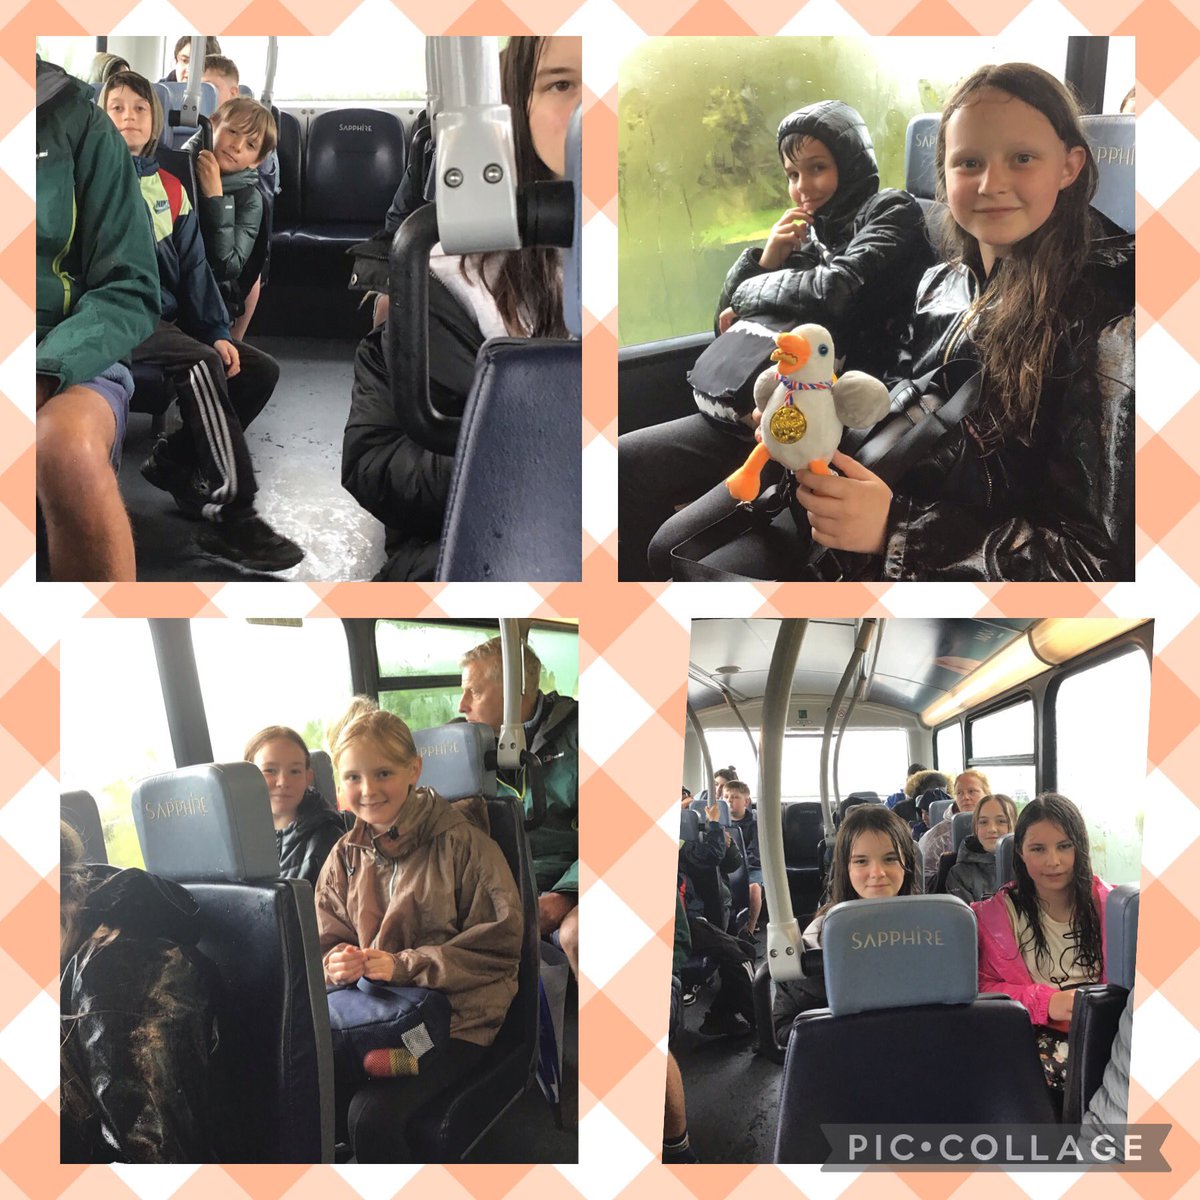 Team Humber have caught the bus into Scarborough this morning because of the rain .. 🌧 We still have smiles all around ☺️ @BandBschool